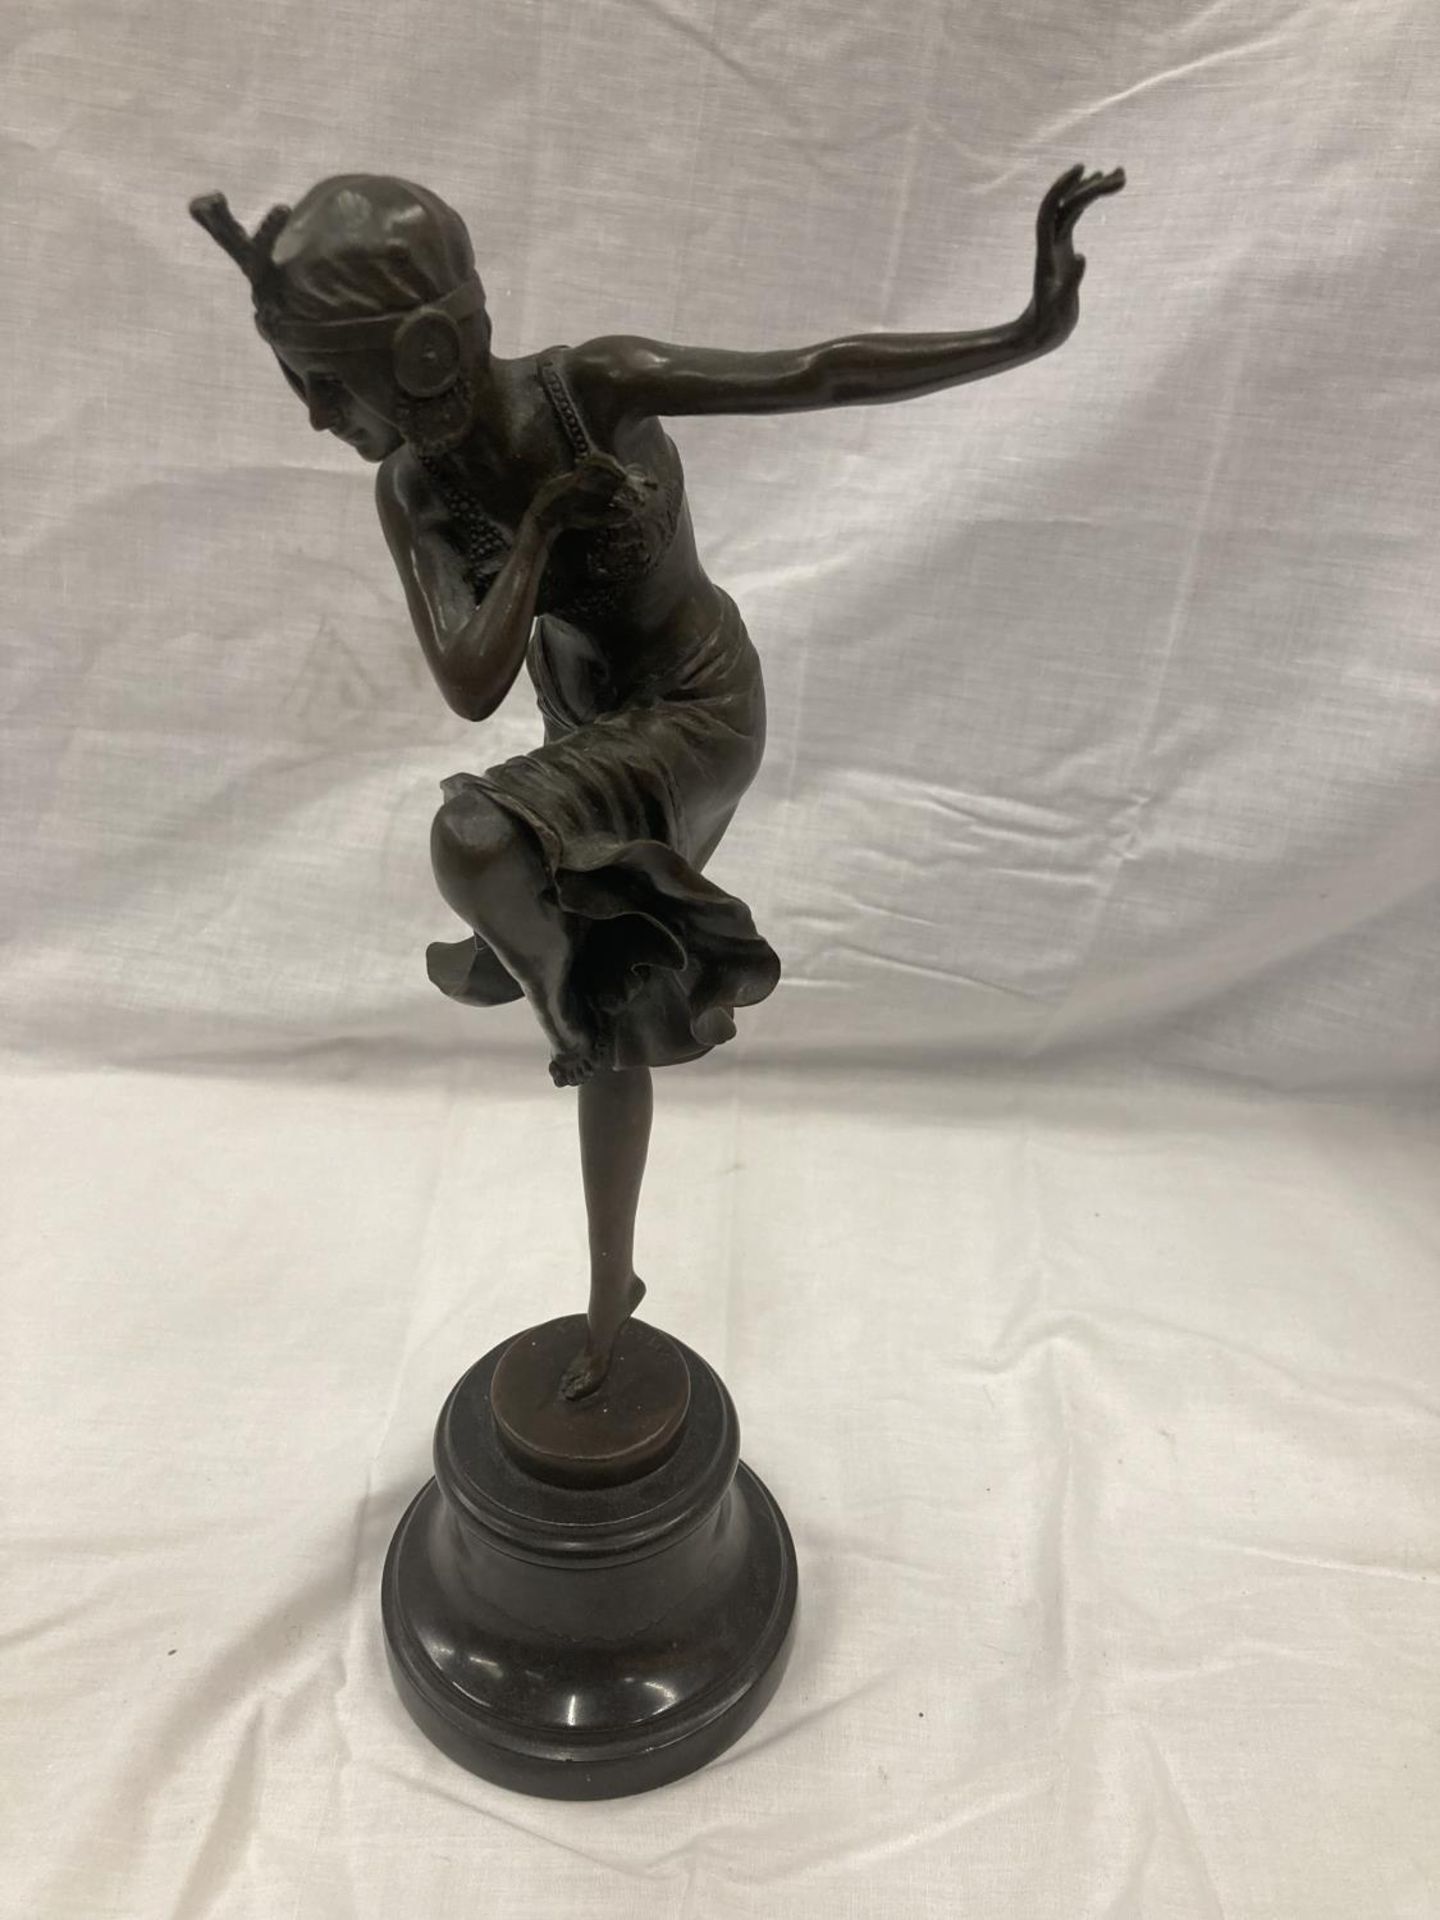 A BRONZE FIGURE OF A DANCING LADY ON A MARBLE BASE SIGNED D H CHIPARUS 39CM TALL